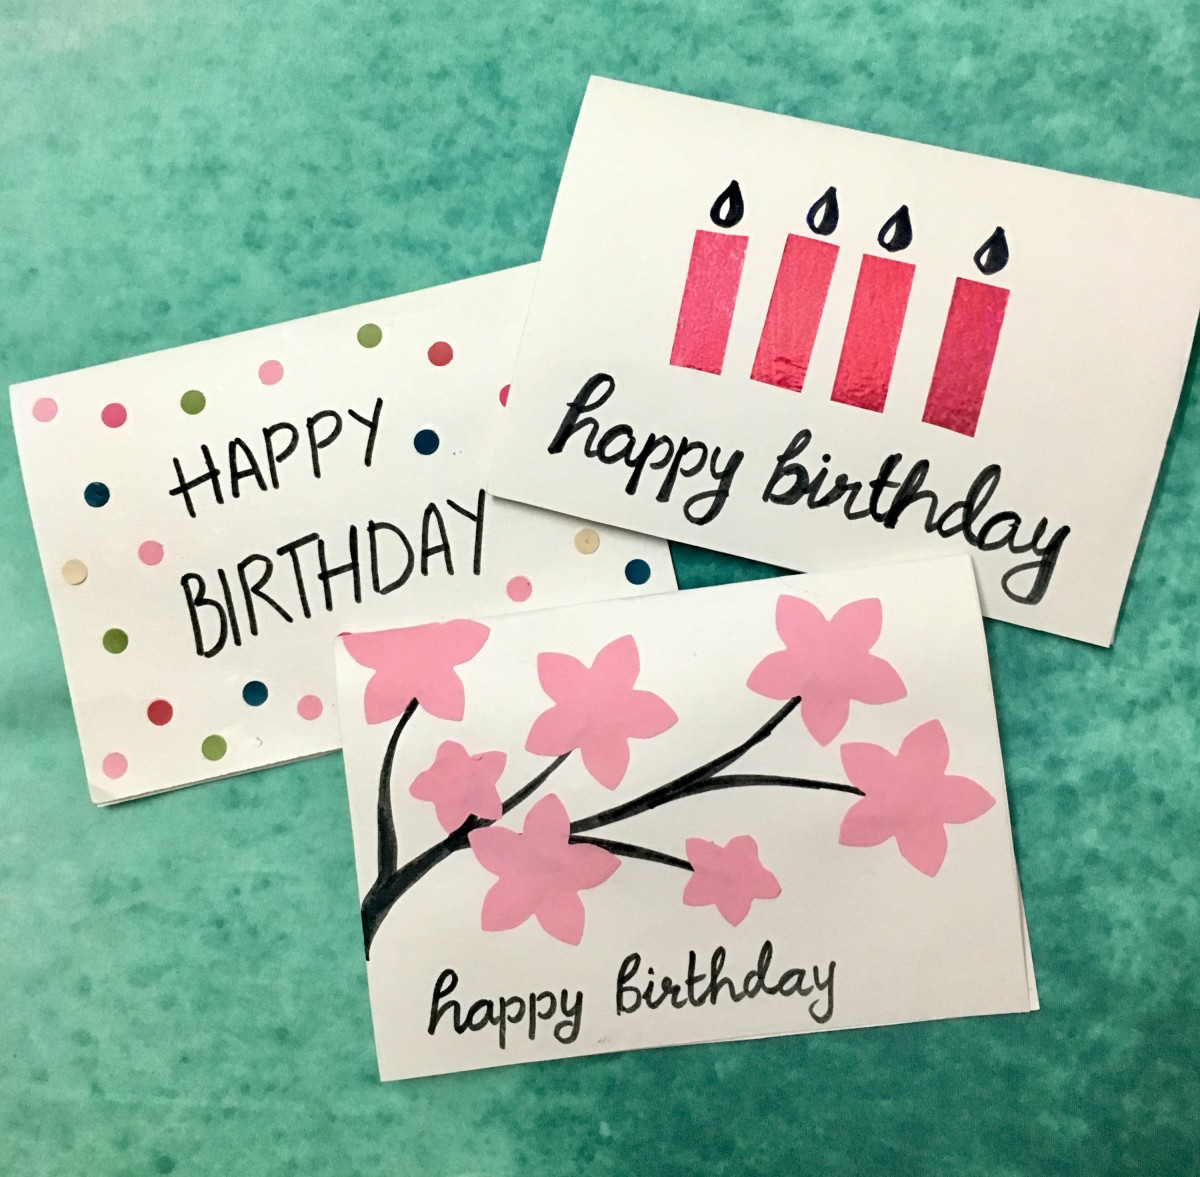 Birthday Cards To Make
 3 Easy 5 Minute DIY Birthday Greeting Cards